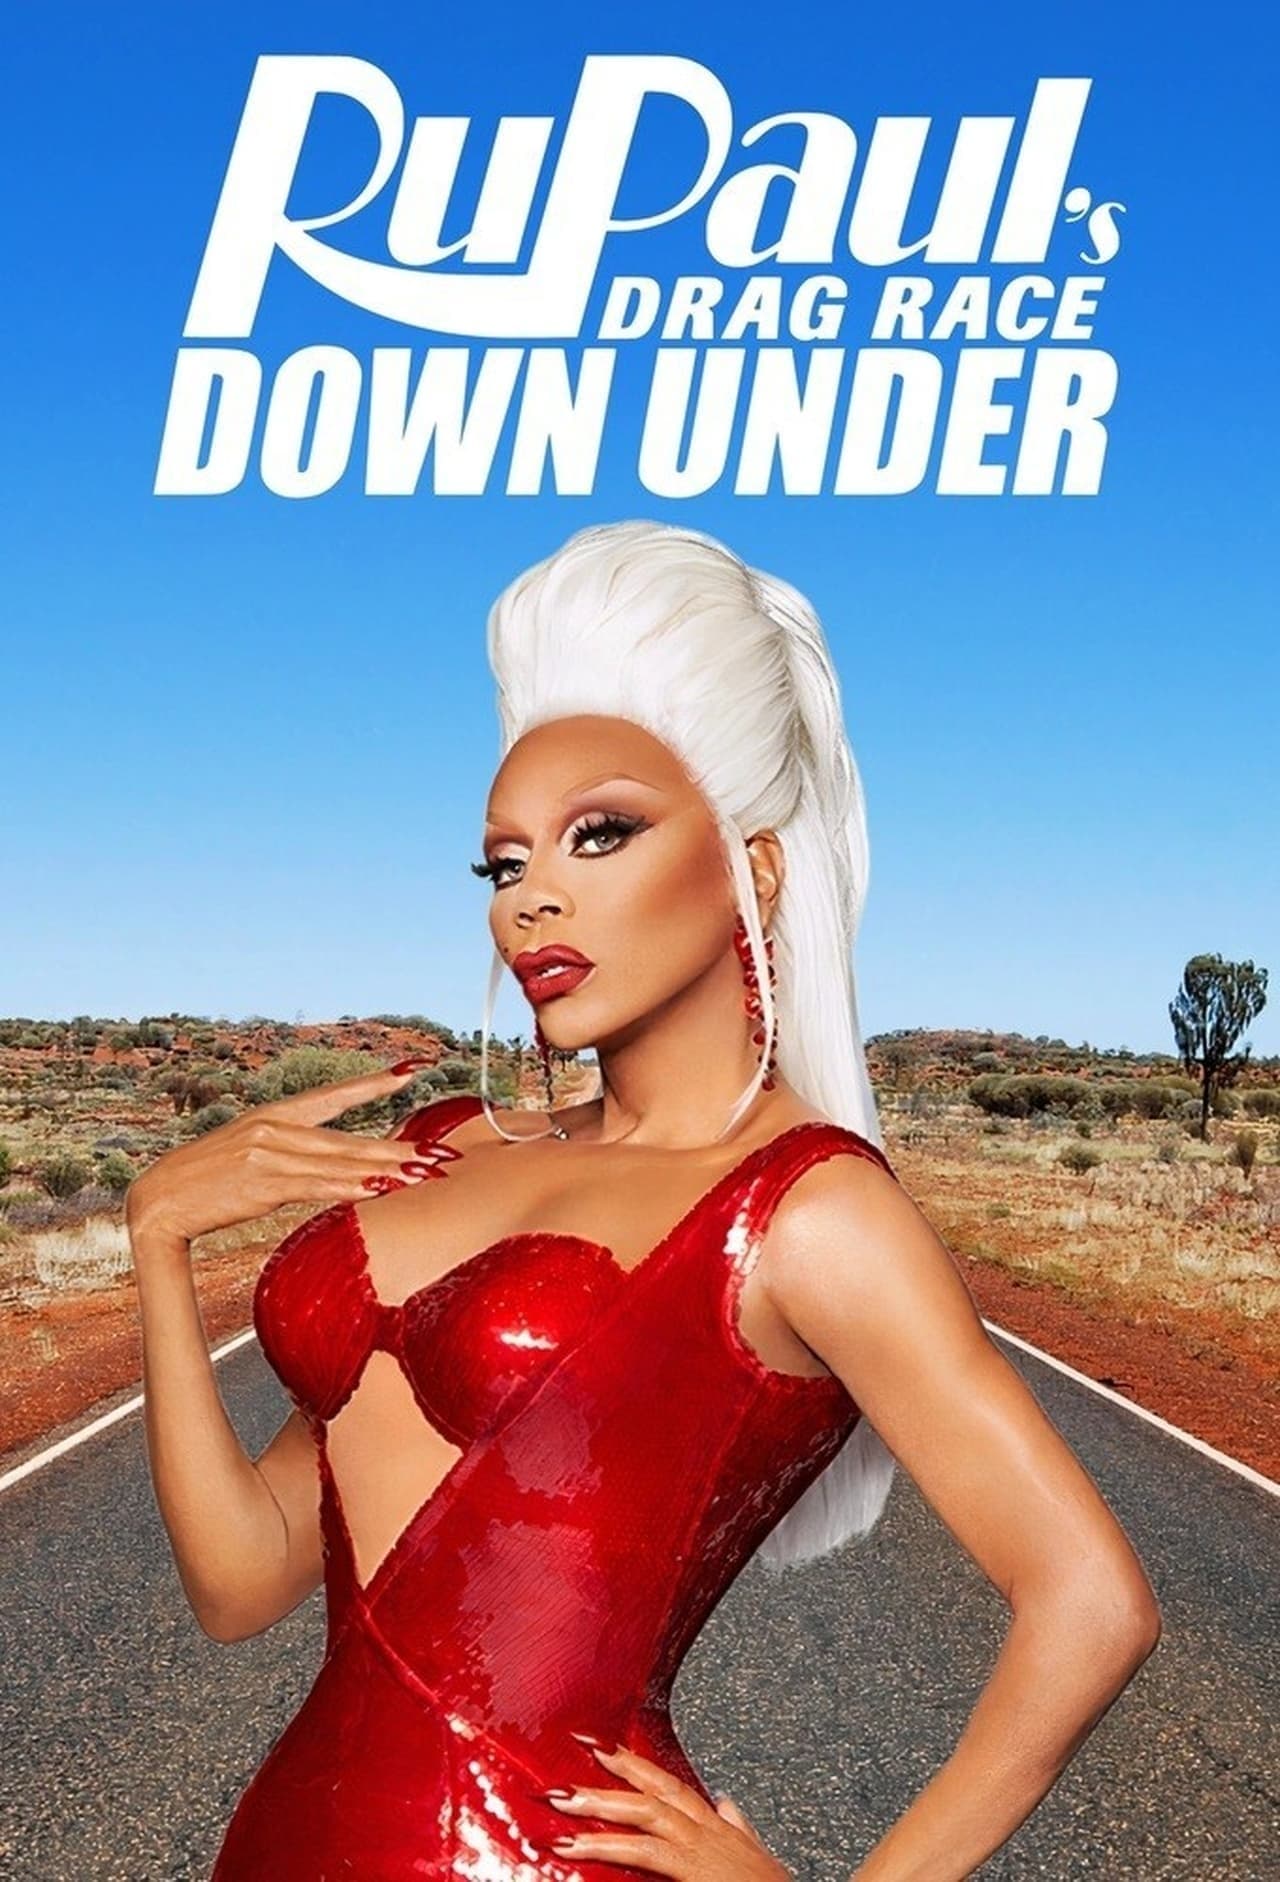 RuPaul's Drag Race Down Under TV Shows About Fashion